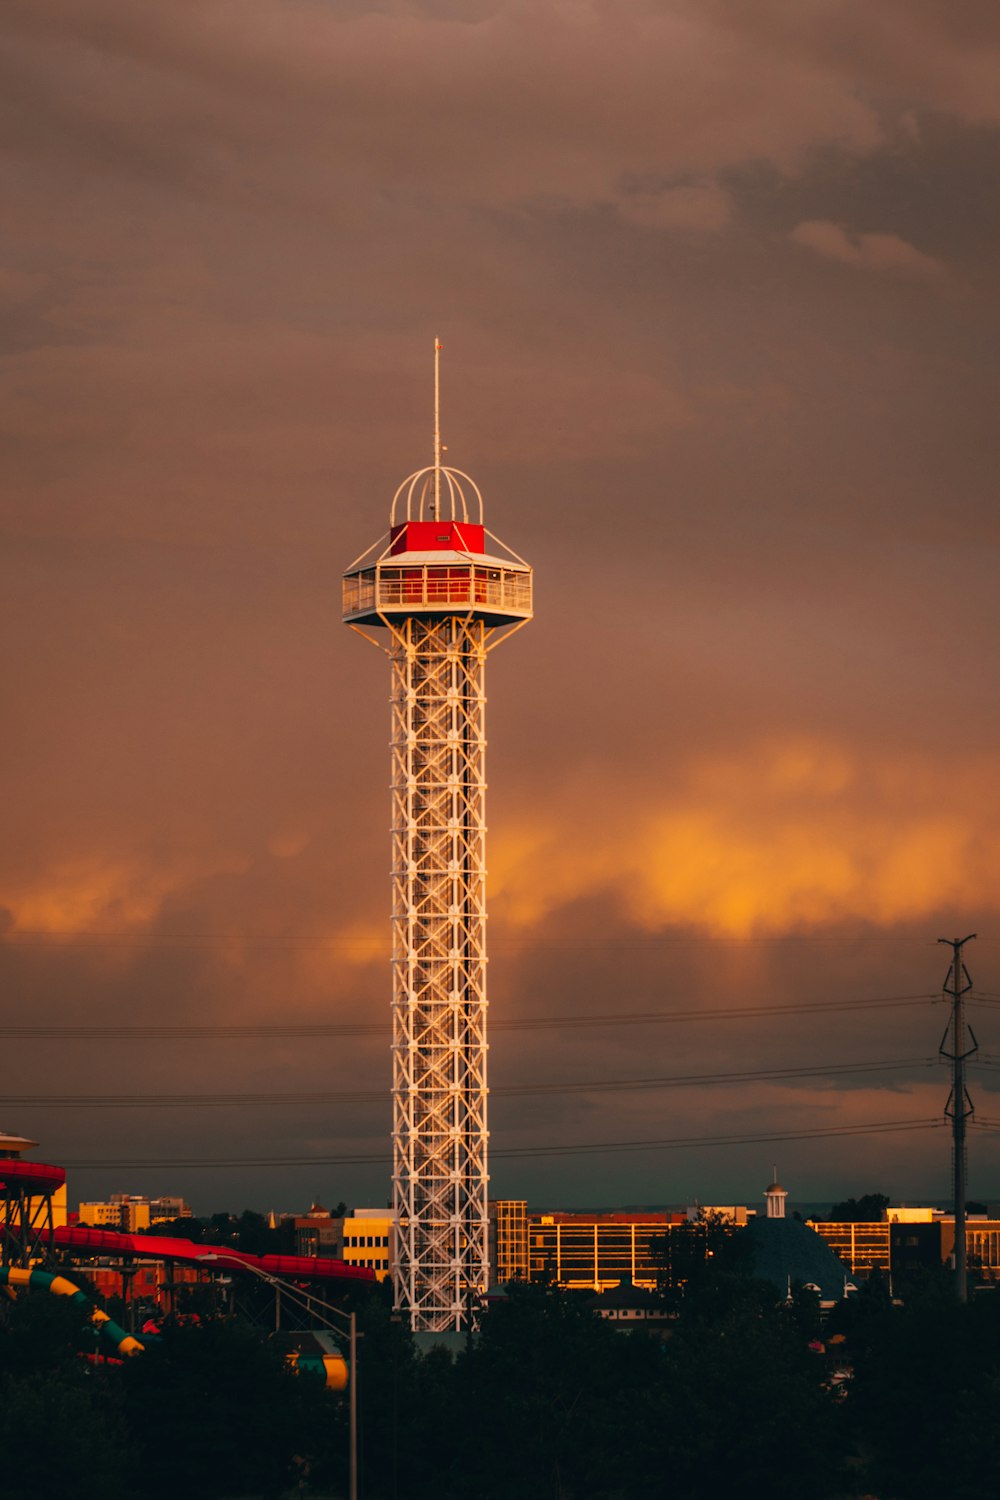 white and red tower under cloudy sky during daytime